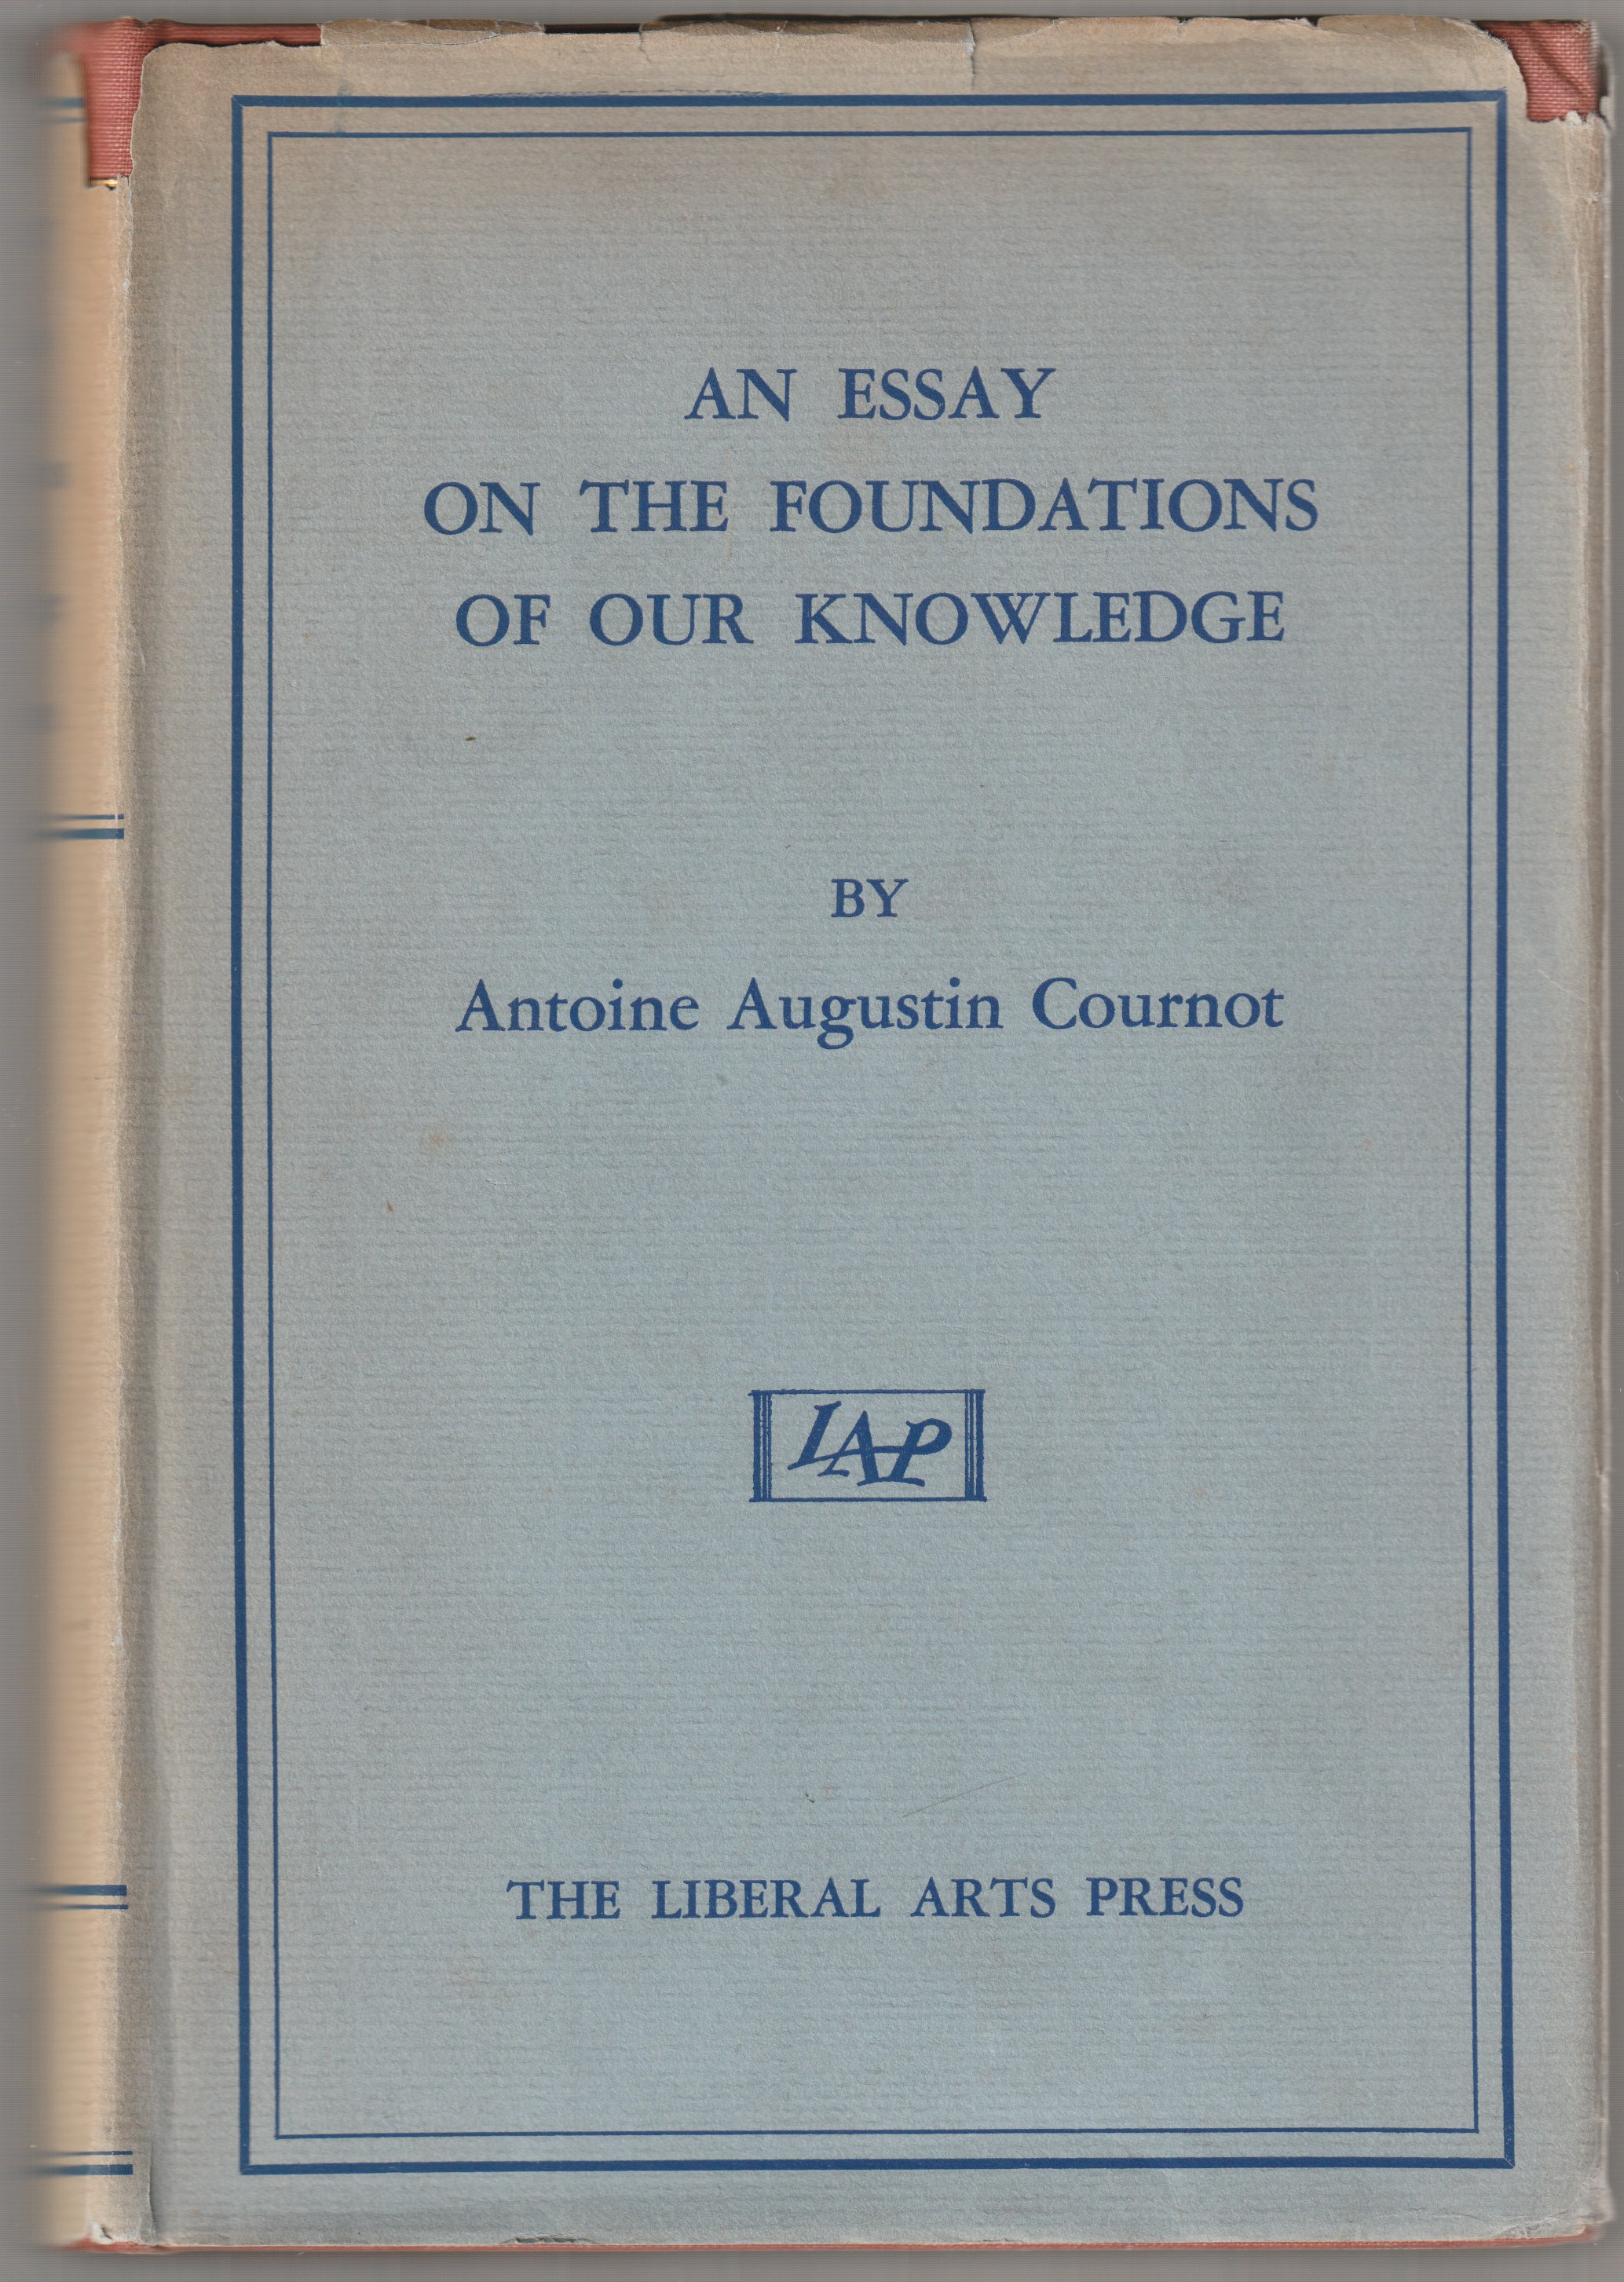 An essay on the foundations of our knowledge.